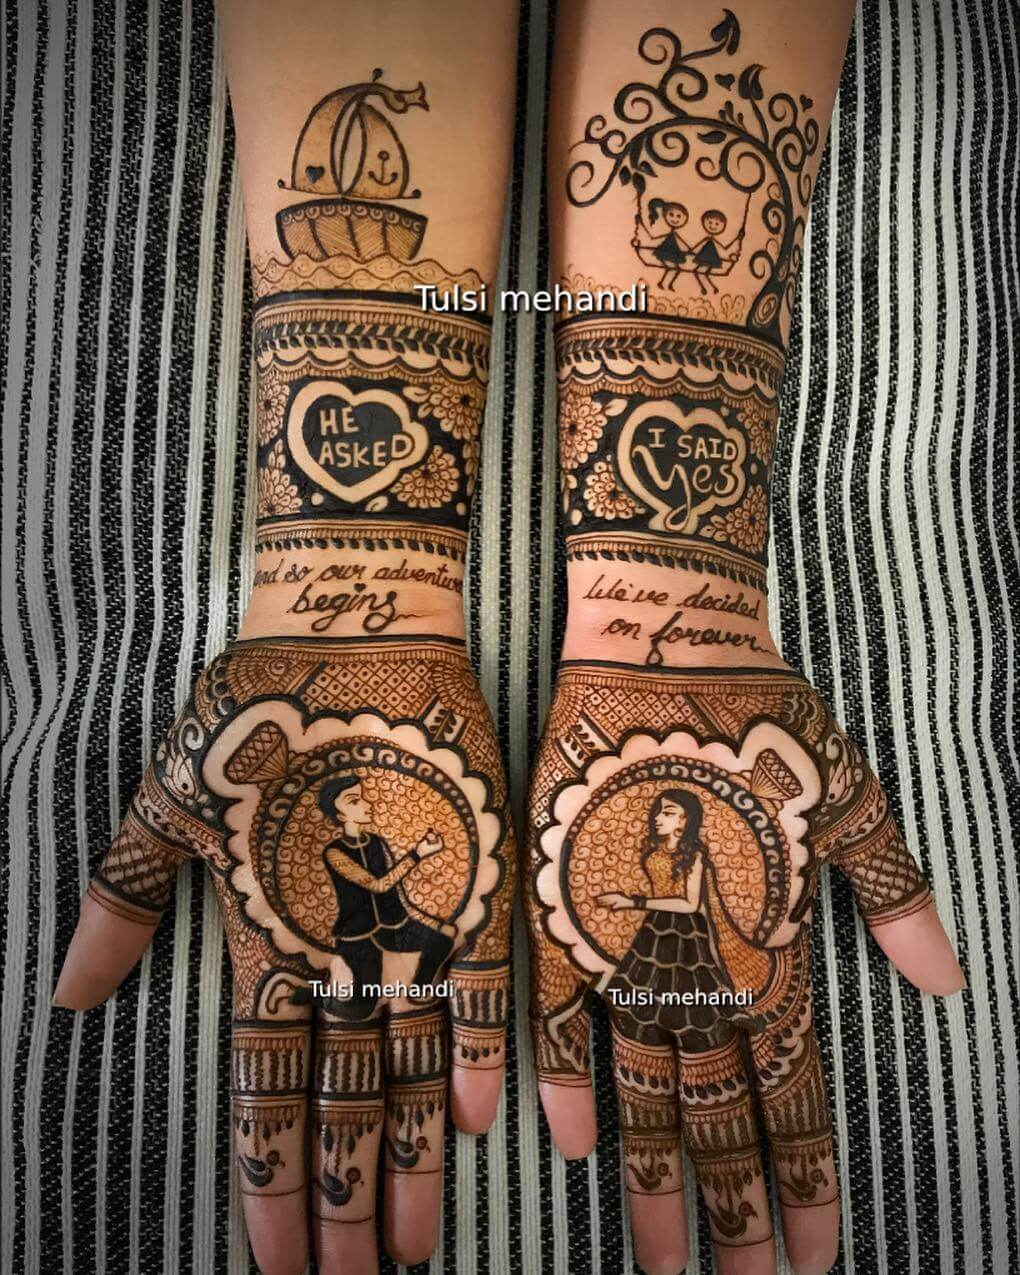 50+ New Bridal Mehndi Designs 2019 - Top Mehandi Design Trends For The Year